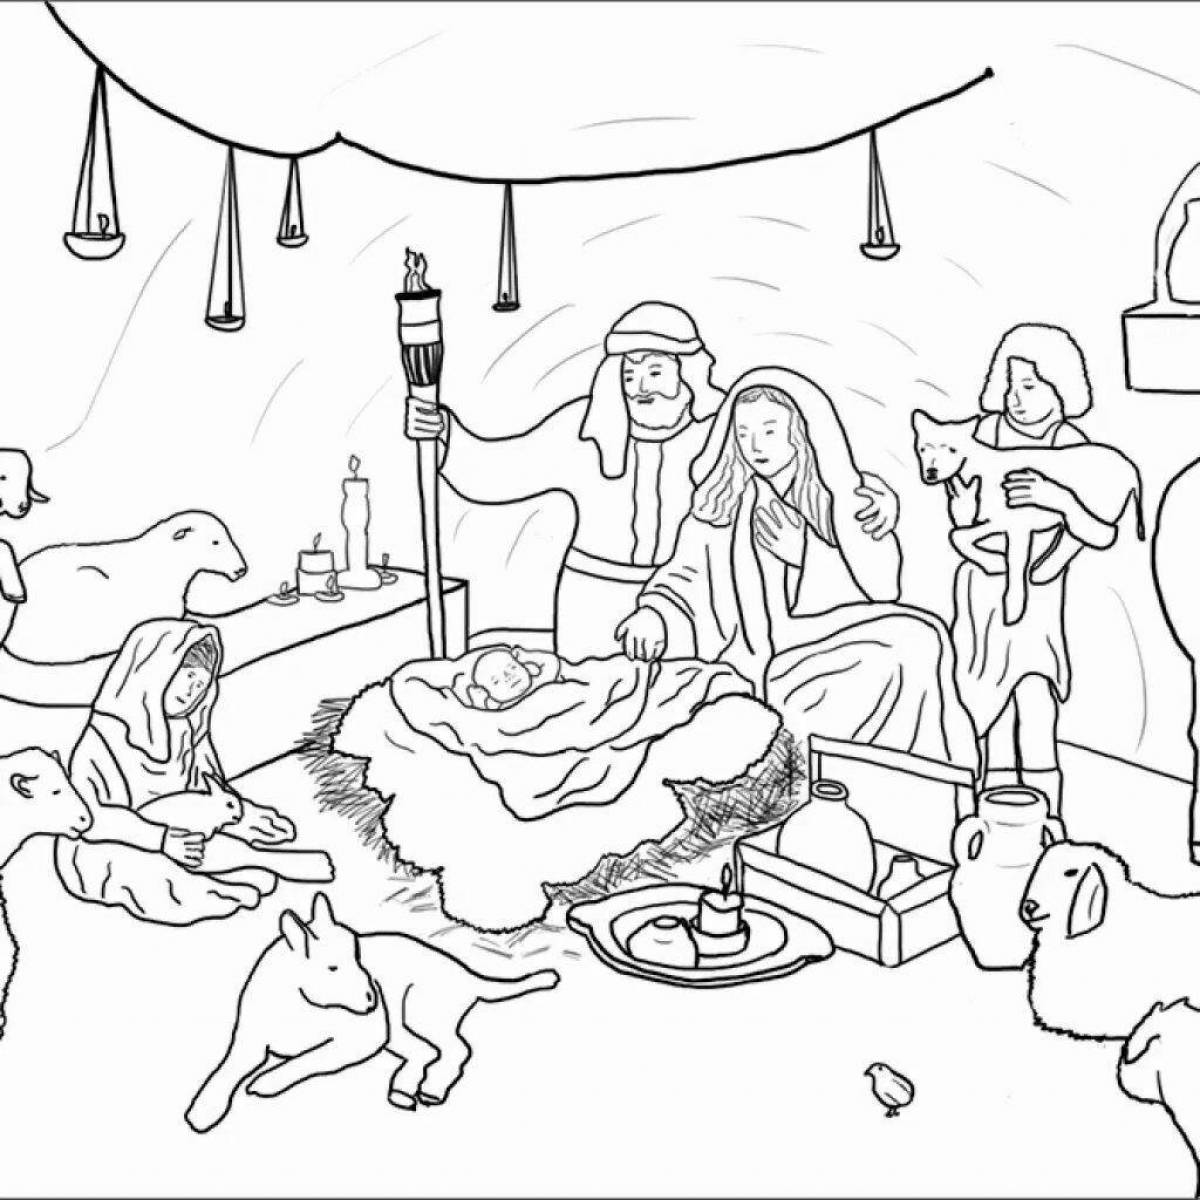 Coloring page magnificent birth of jesus christ